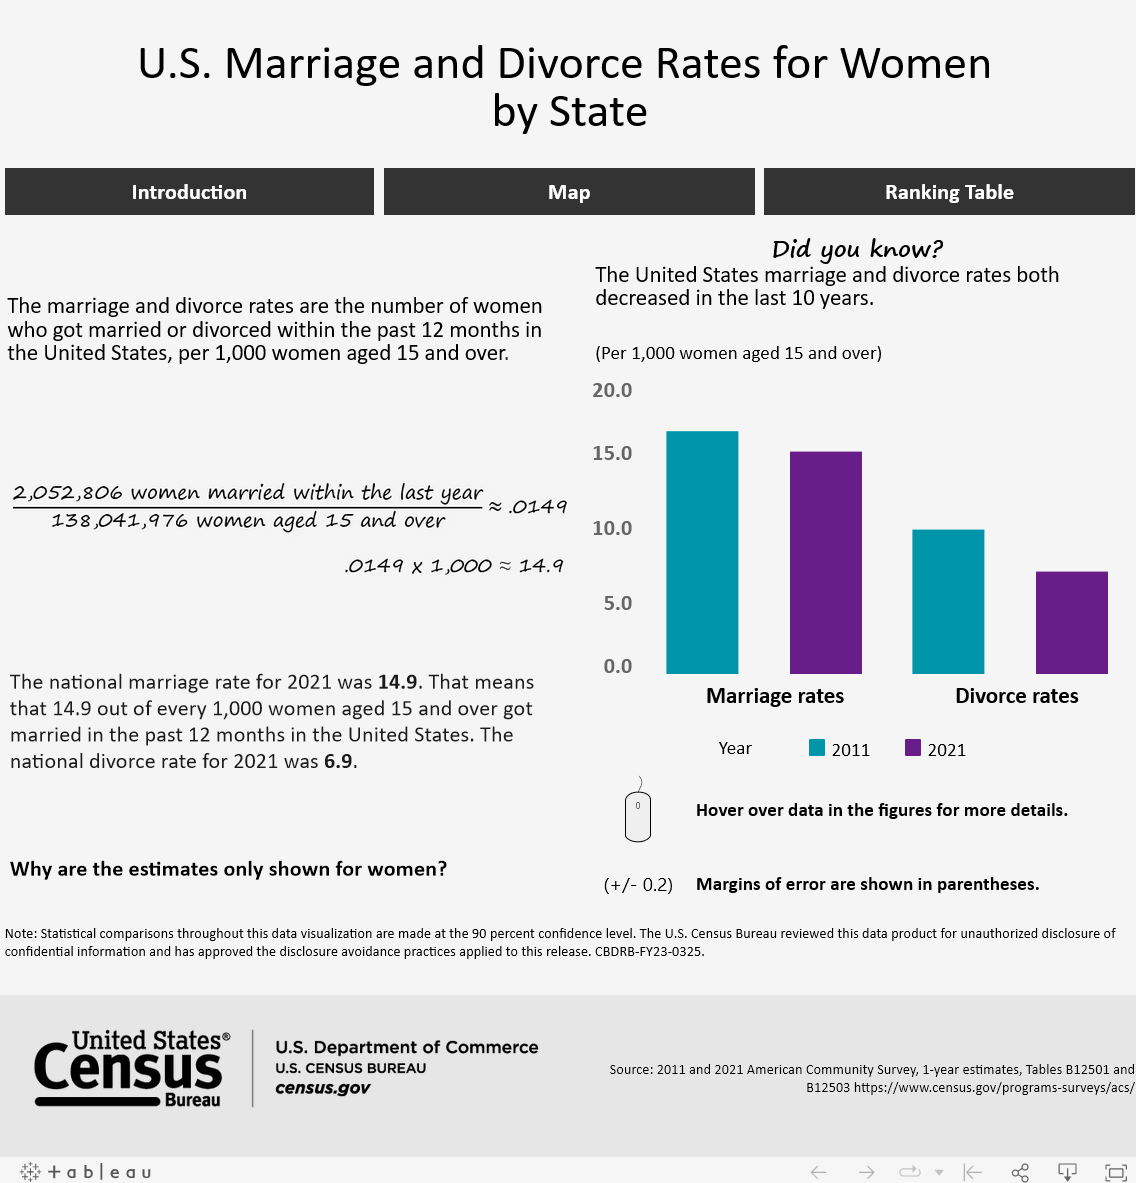 Screen shot of U.S. Marriage and Divorce Rates by State: 2011 & 2021